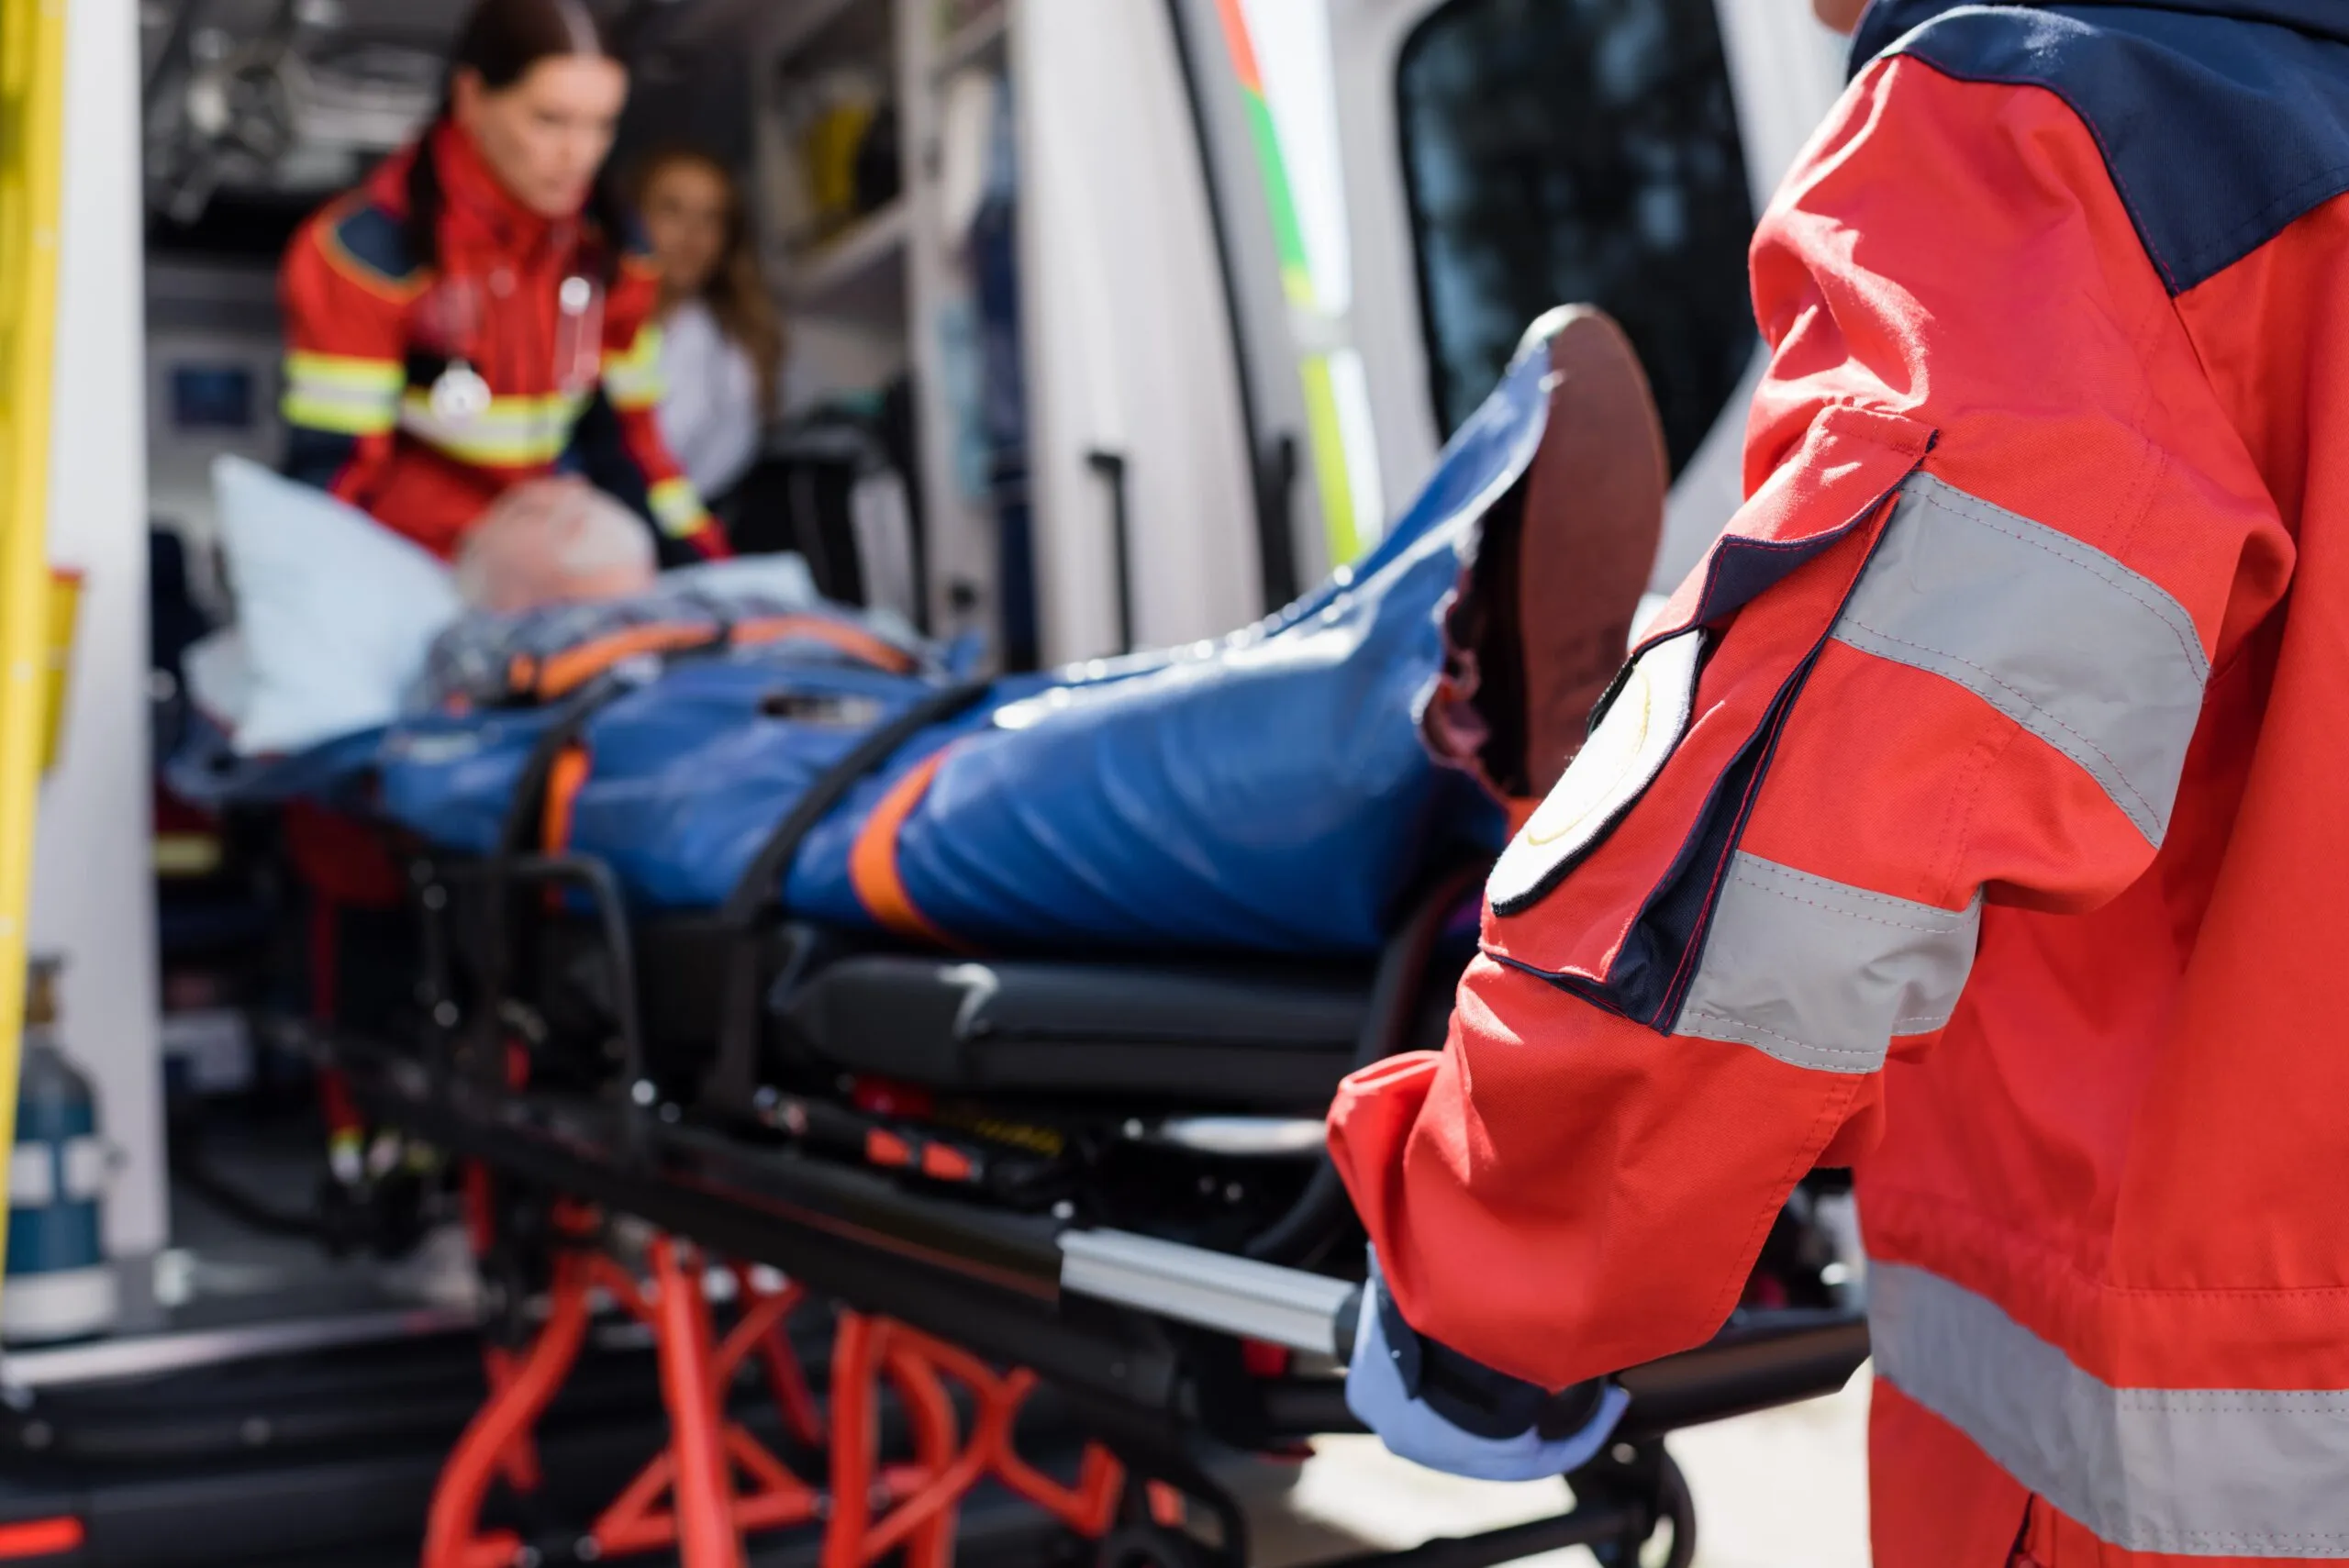 Man lays, strapped in a stretcher as he is pulled into an ambulance by EMT. Contact our catastrophic injury lawyers for a strong legal representative in Austin, TX if you’ve been severely injured in an accident.